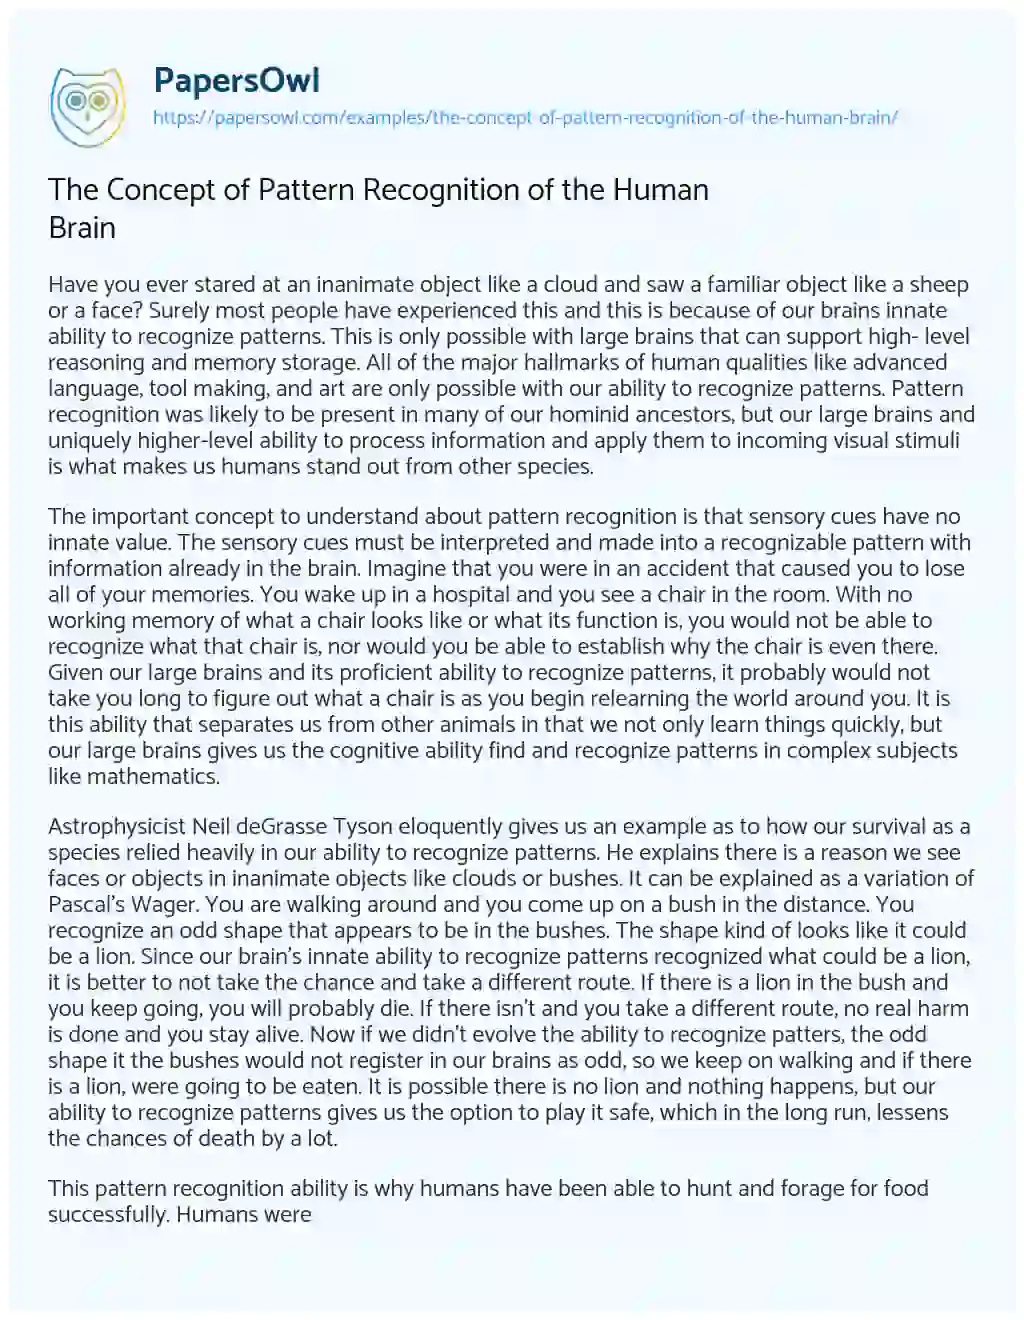 Essay on The Concept of Pattern Recognition of the Human Brain